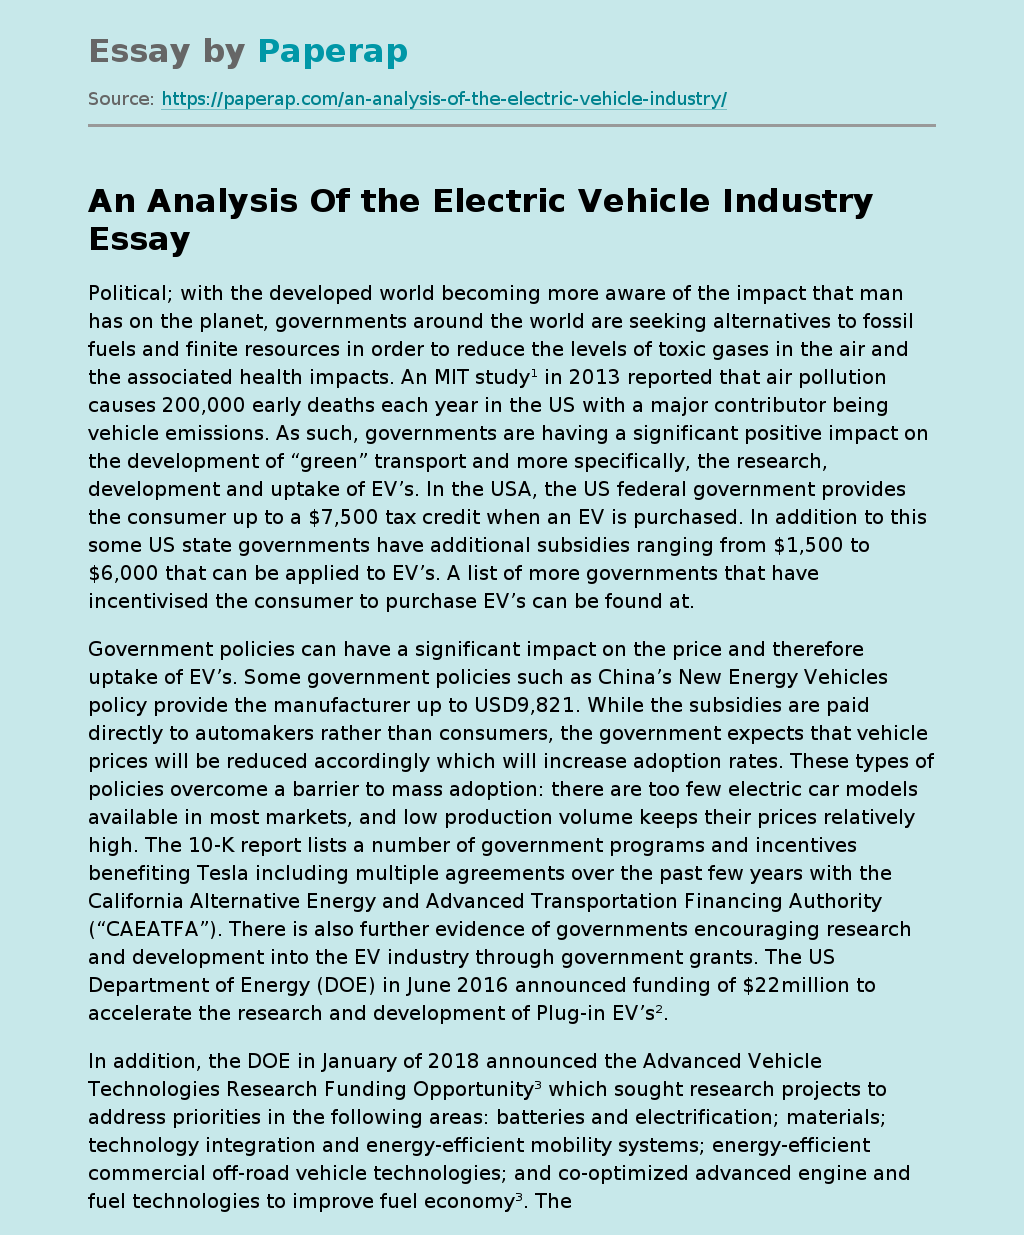 An Analysis Of the Electric Vehicle Industry